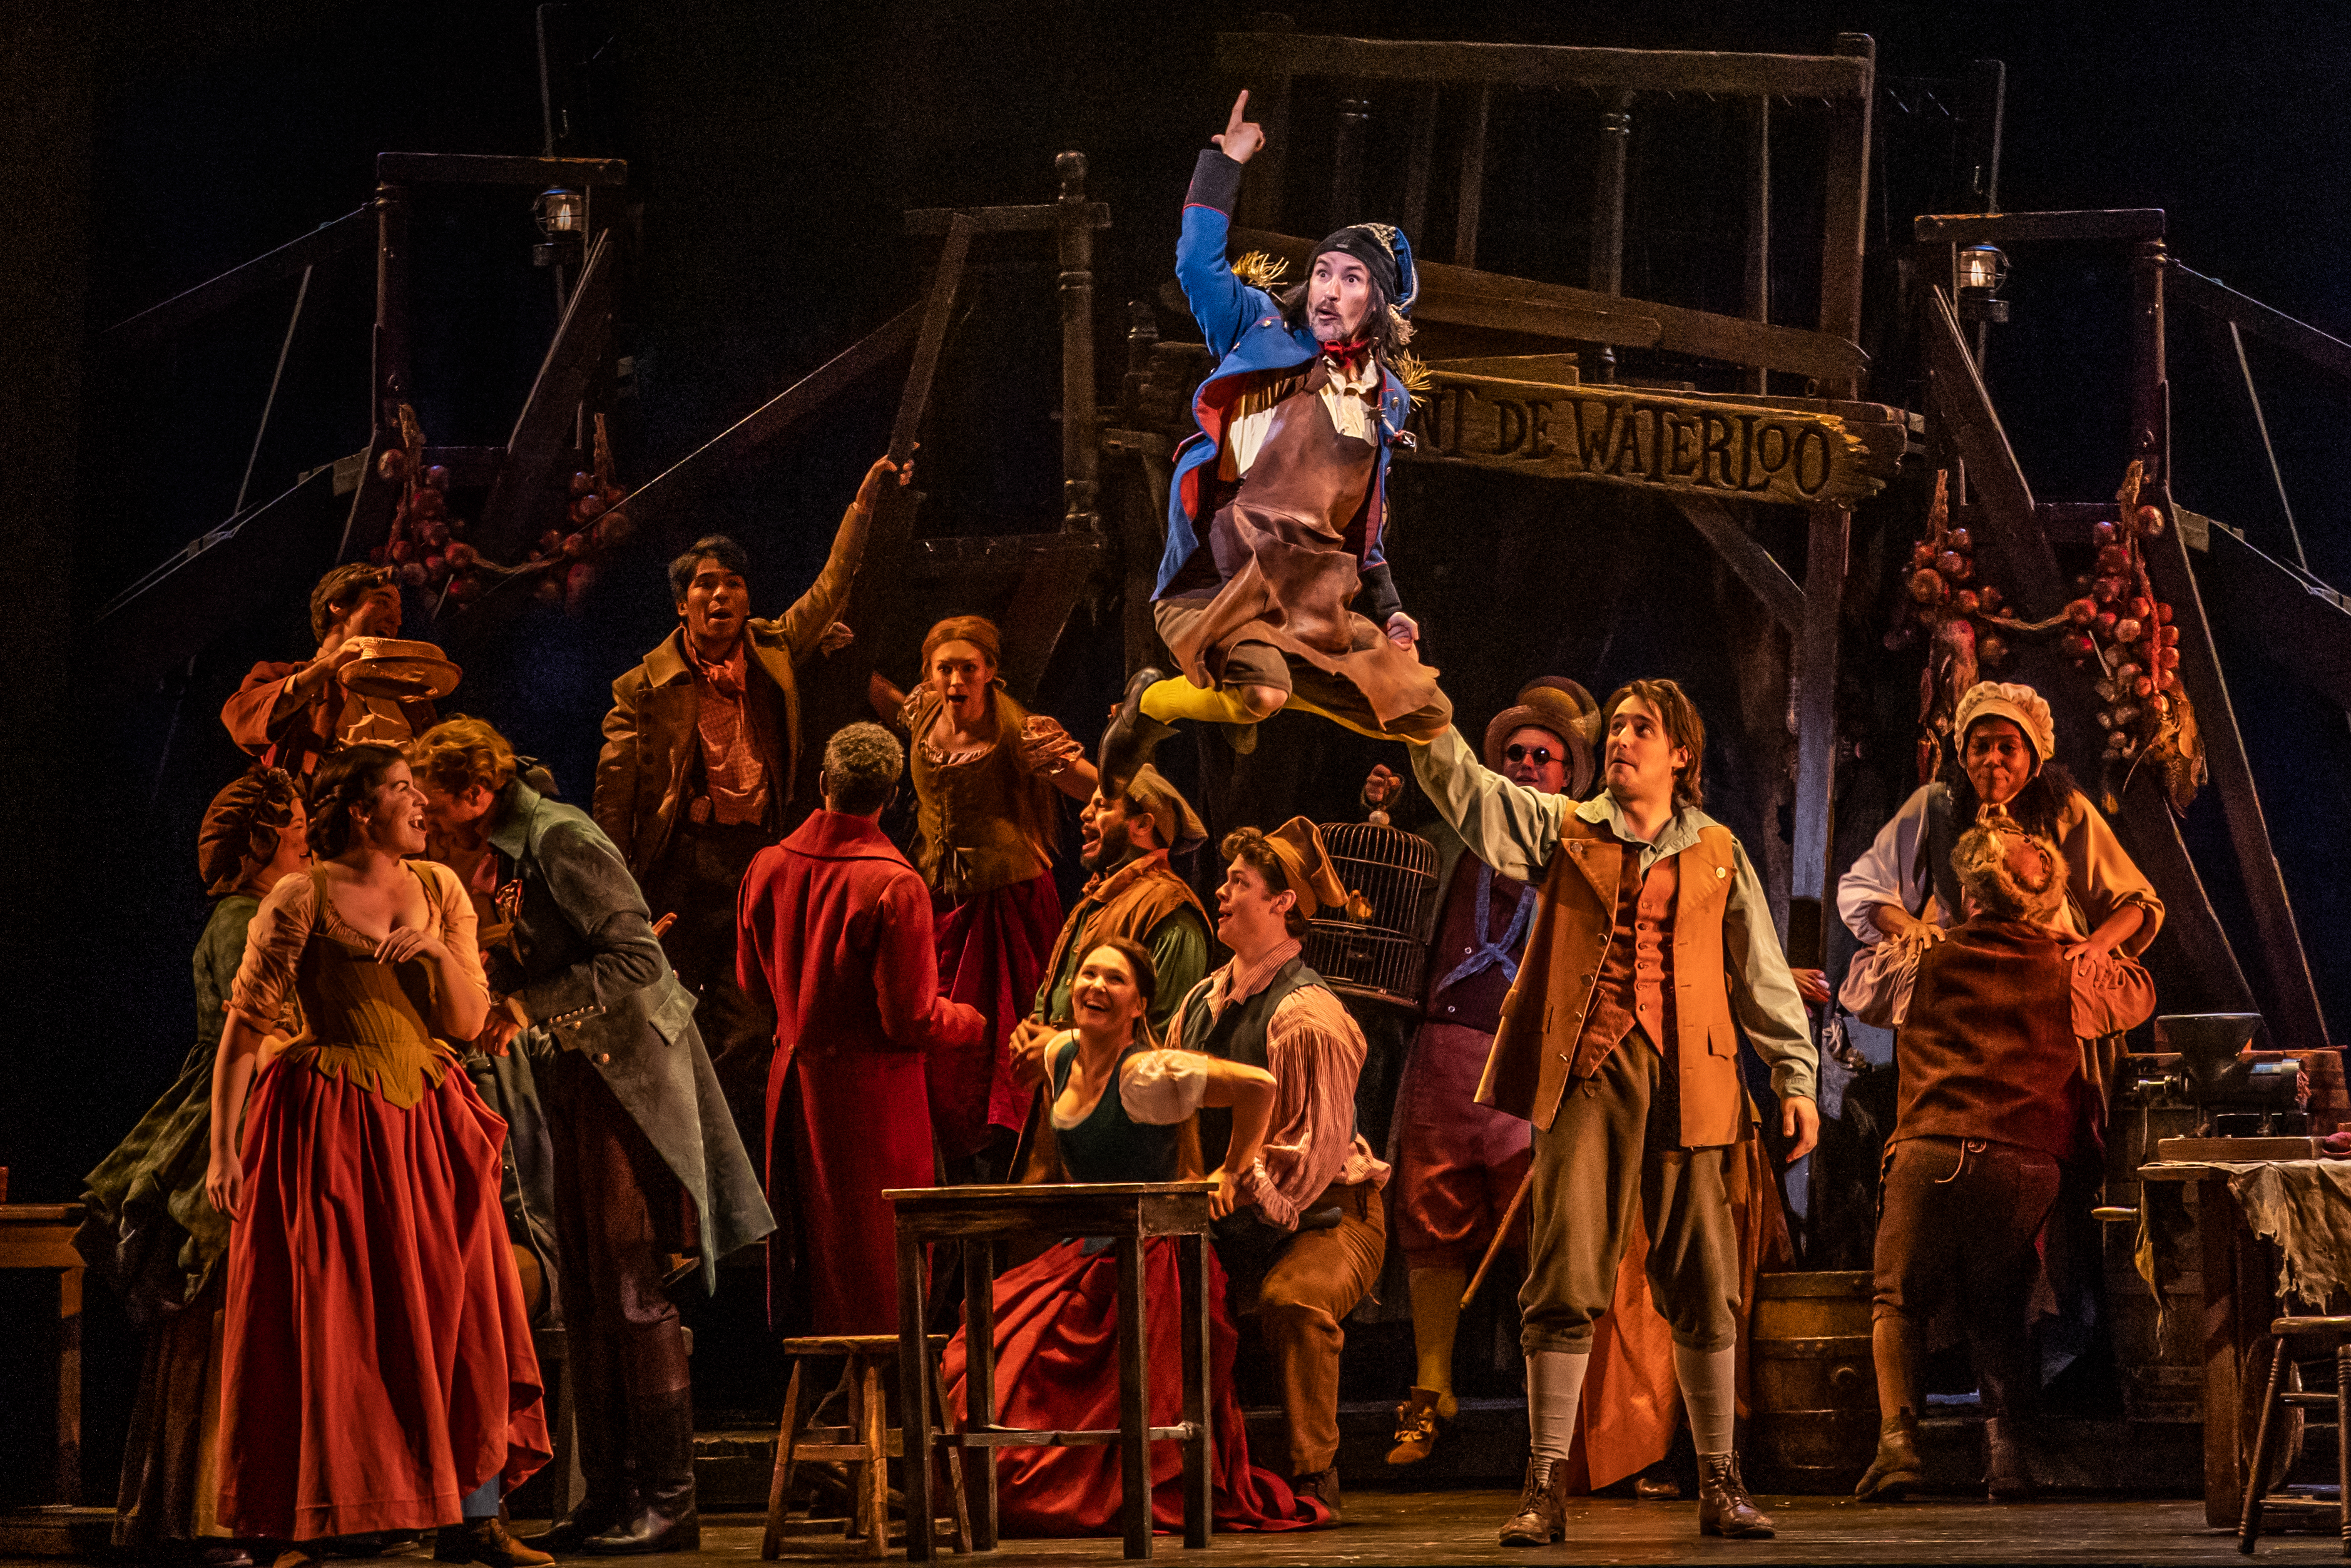 “Master of the House” from LES MISÉRABLES. Photo by Matthew Murphy and Evan Zimmerman for MurphyMade.